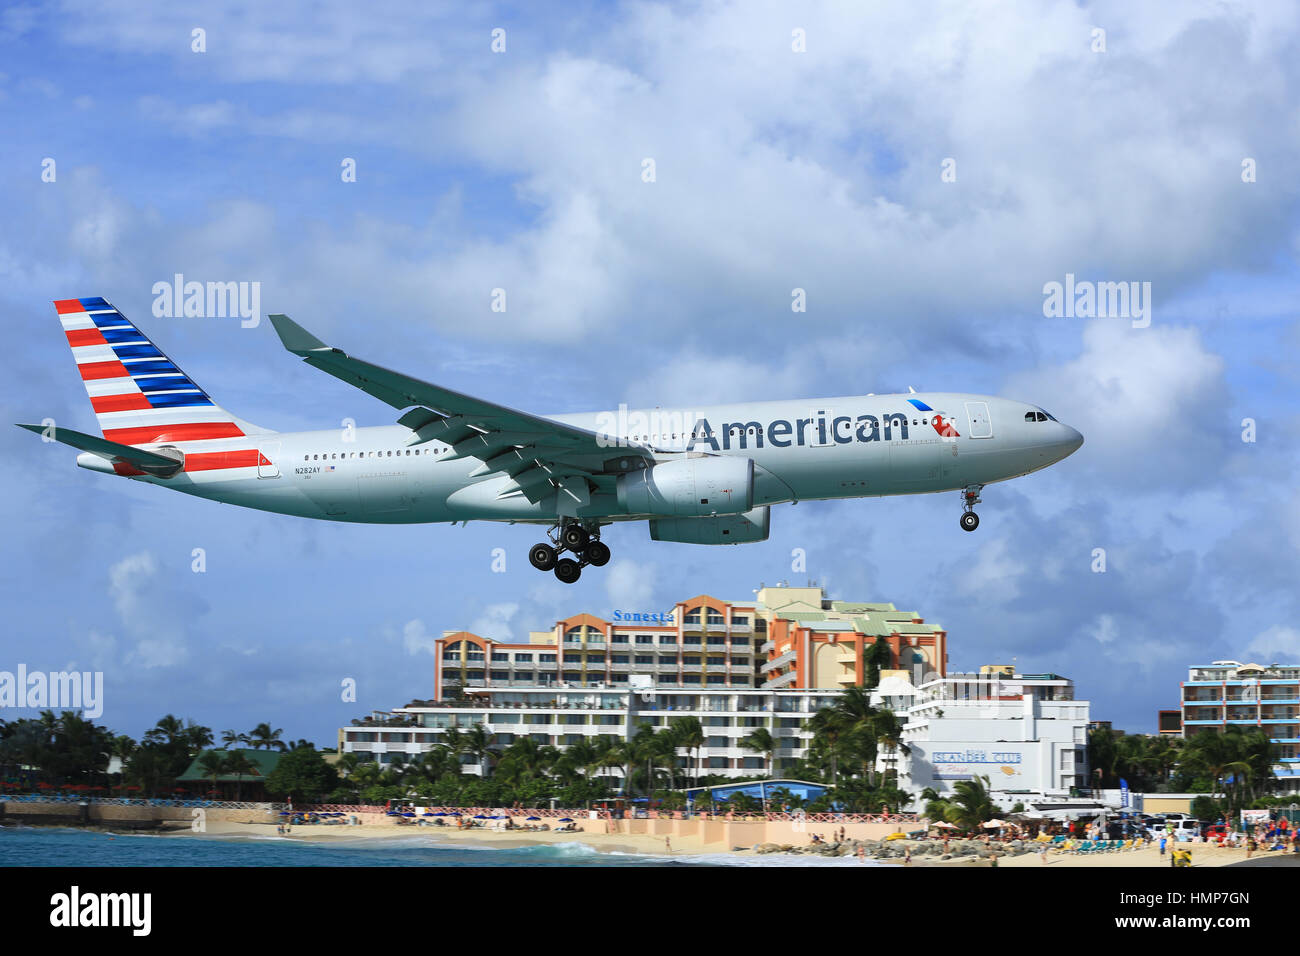 The American Airlines Airbus A.330 on short final approach to land over Maho Beach, Sint Maarten Stock Photo